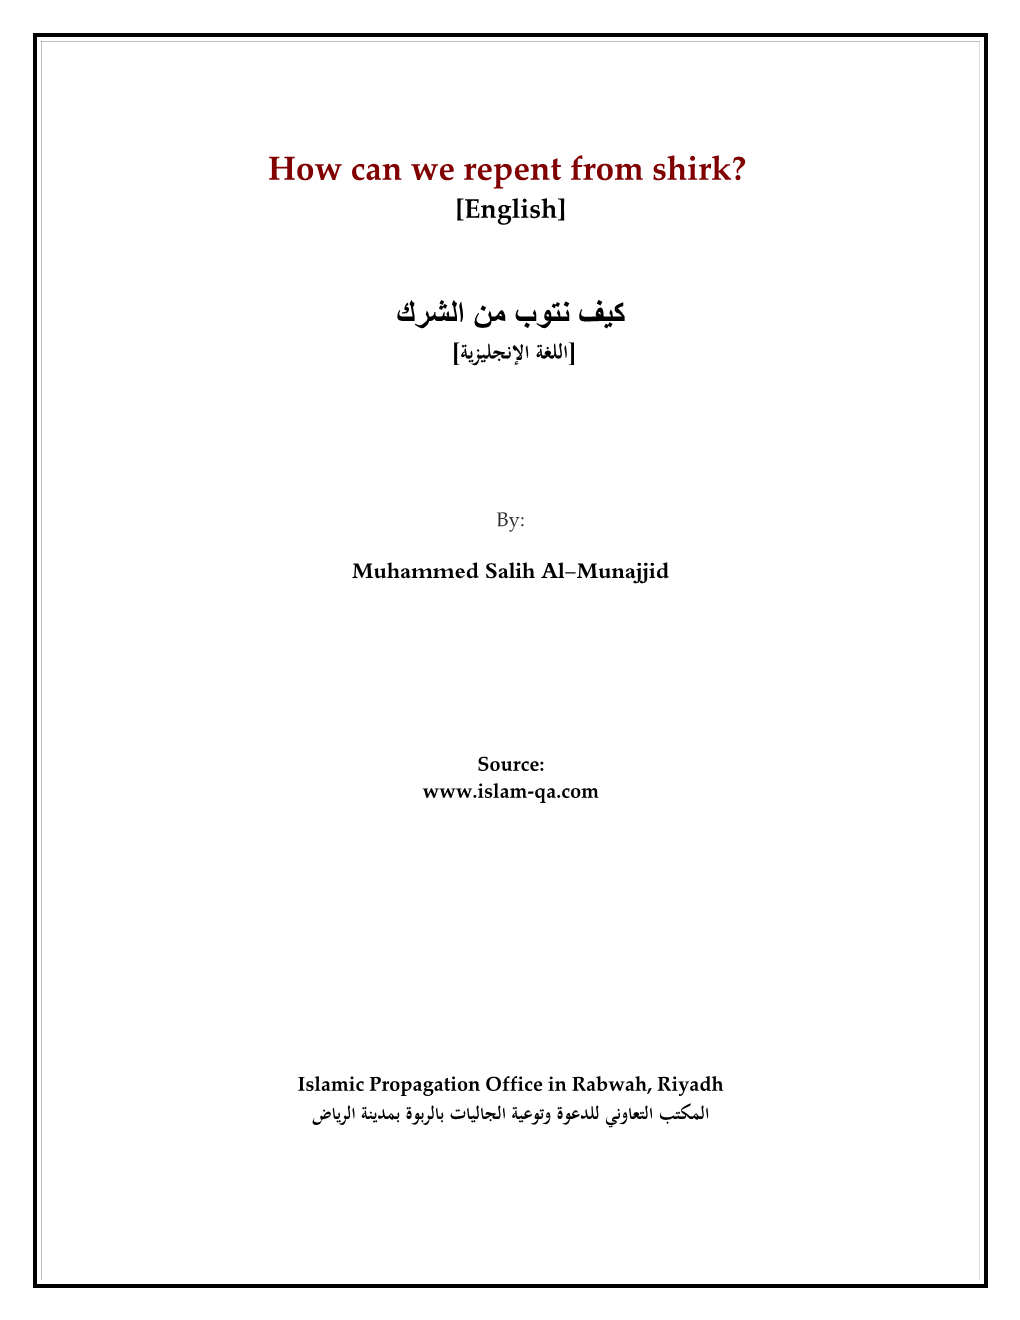 How Can We Repent from Shirk